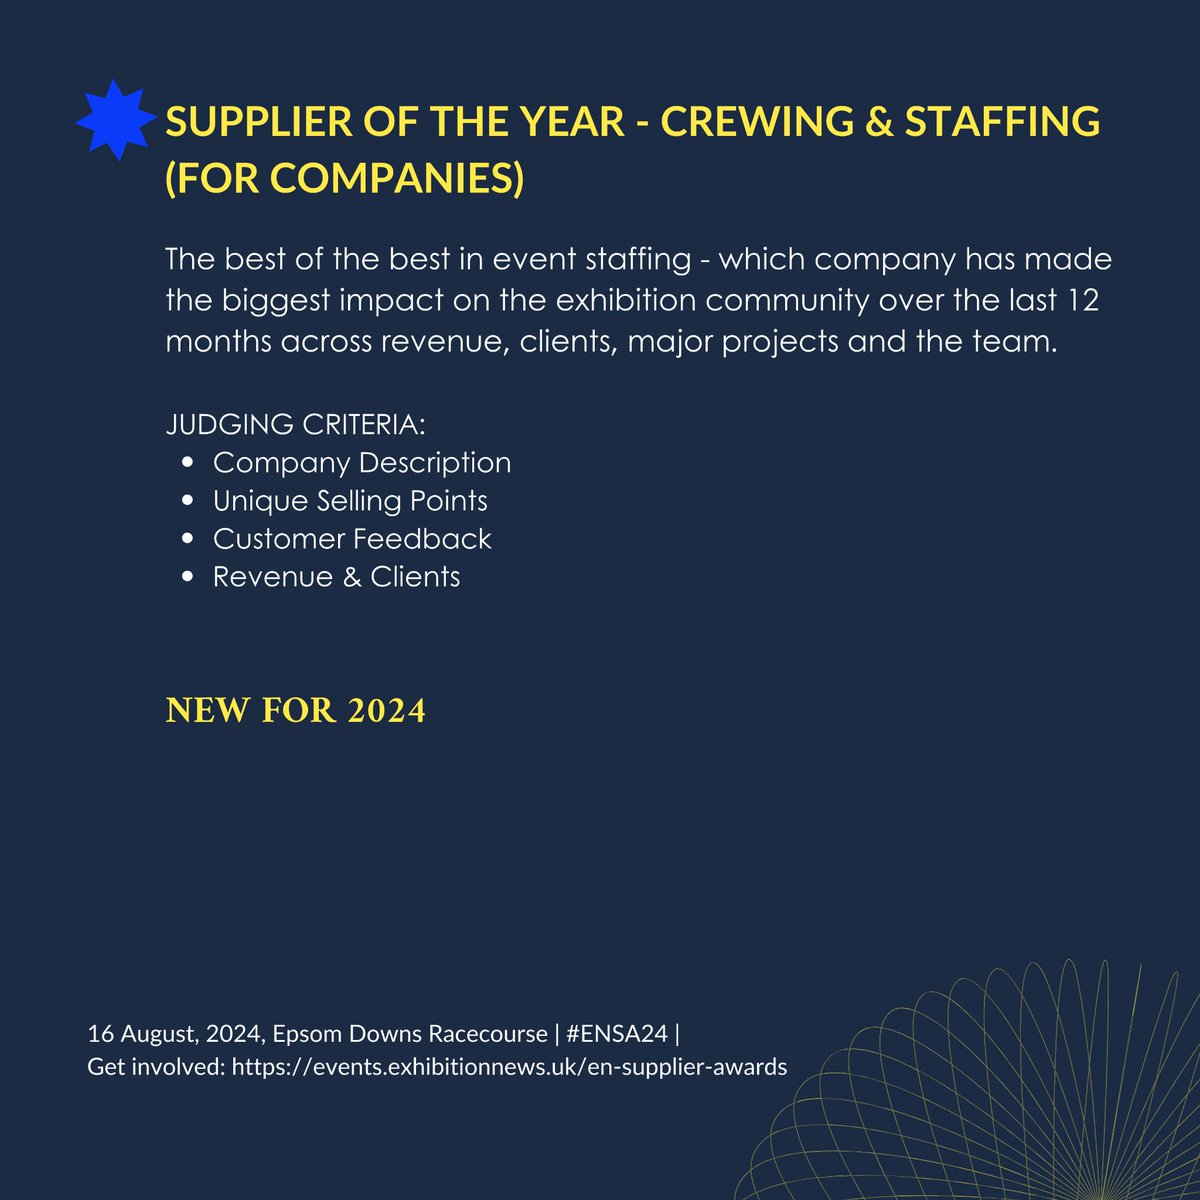 Check out the criteria for #ENSA24 category: Supplier of the Year - Crewing/Staffing 👥
With 43% of our EN100 showing interest in this award. Nominate your company today! 🌟

okt.to/CuhAsX

#EventStaffing #EventSupplier #eventindustry #eventprofs #exhibitionstaff